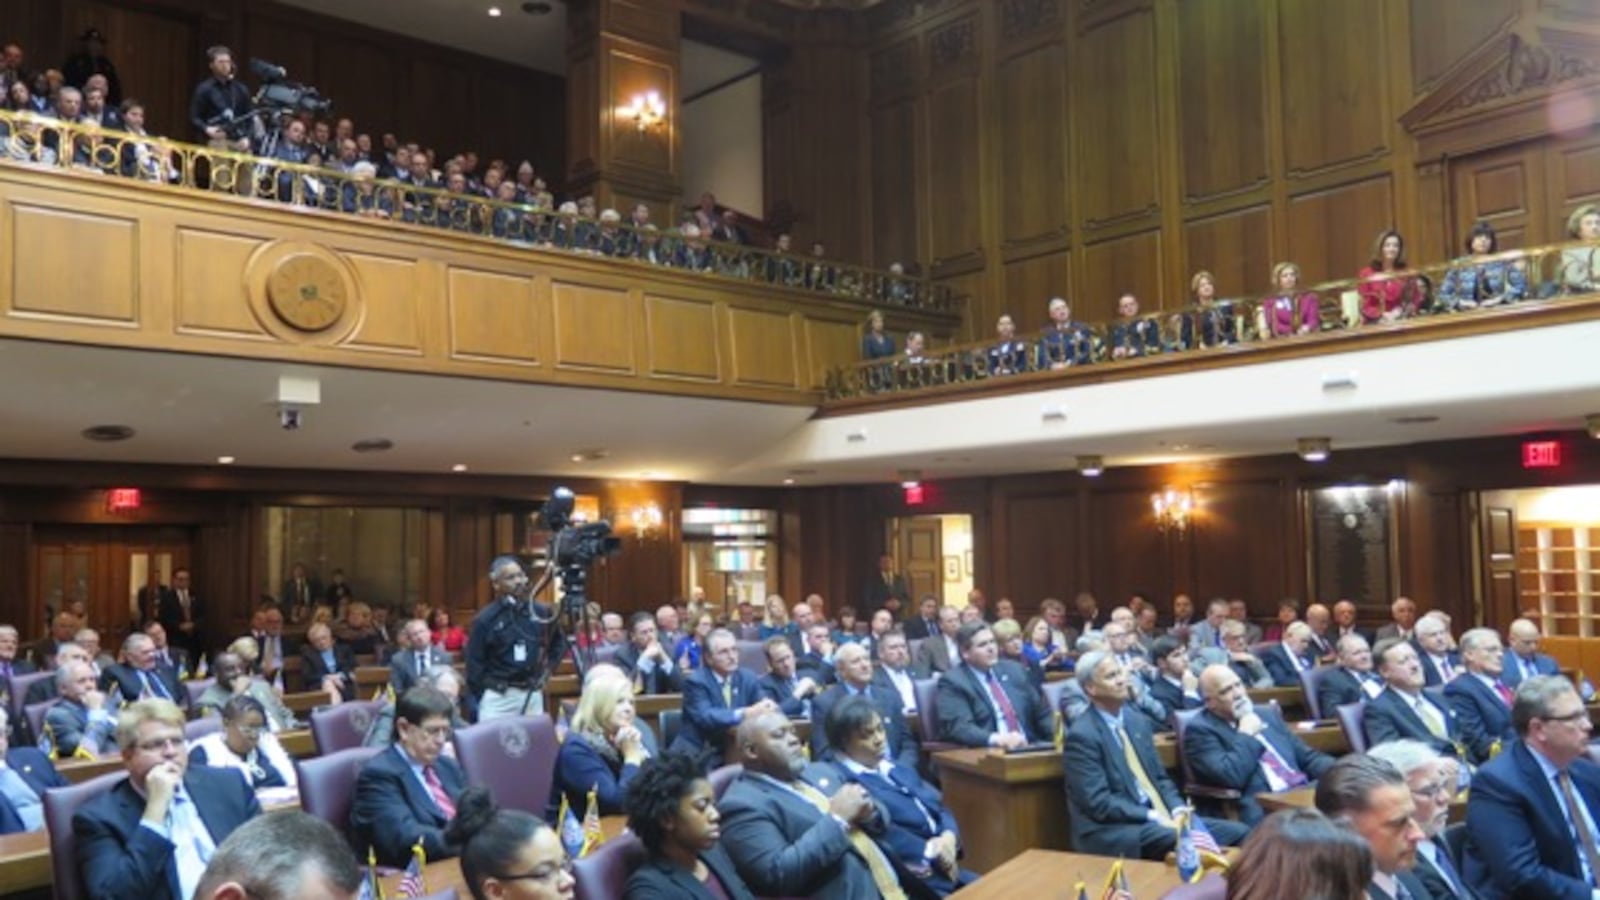 Lawmakers gathered Tuesday for Gov. Mike Pence's State of the State address.